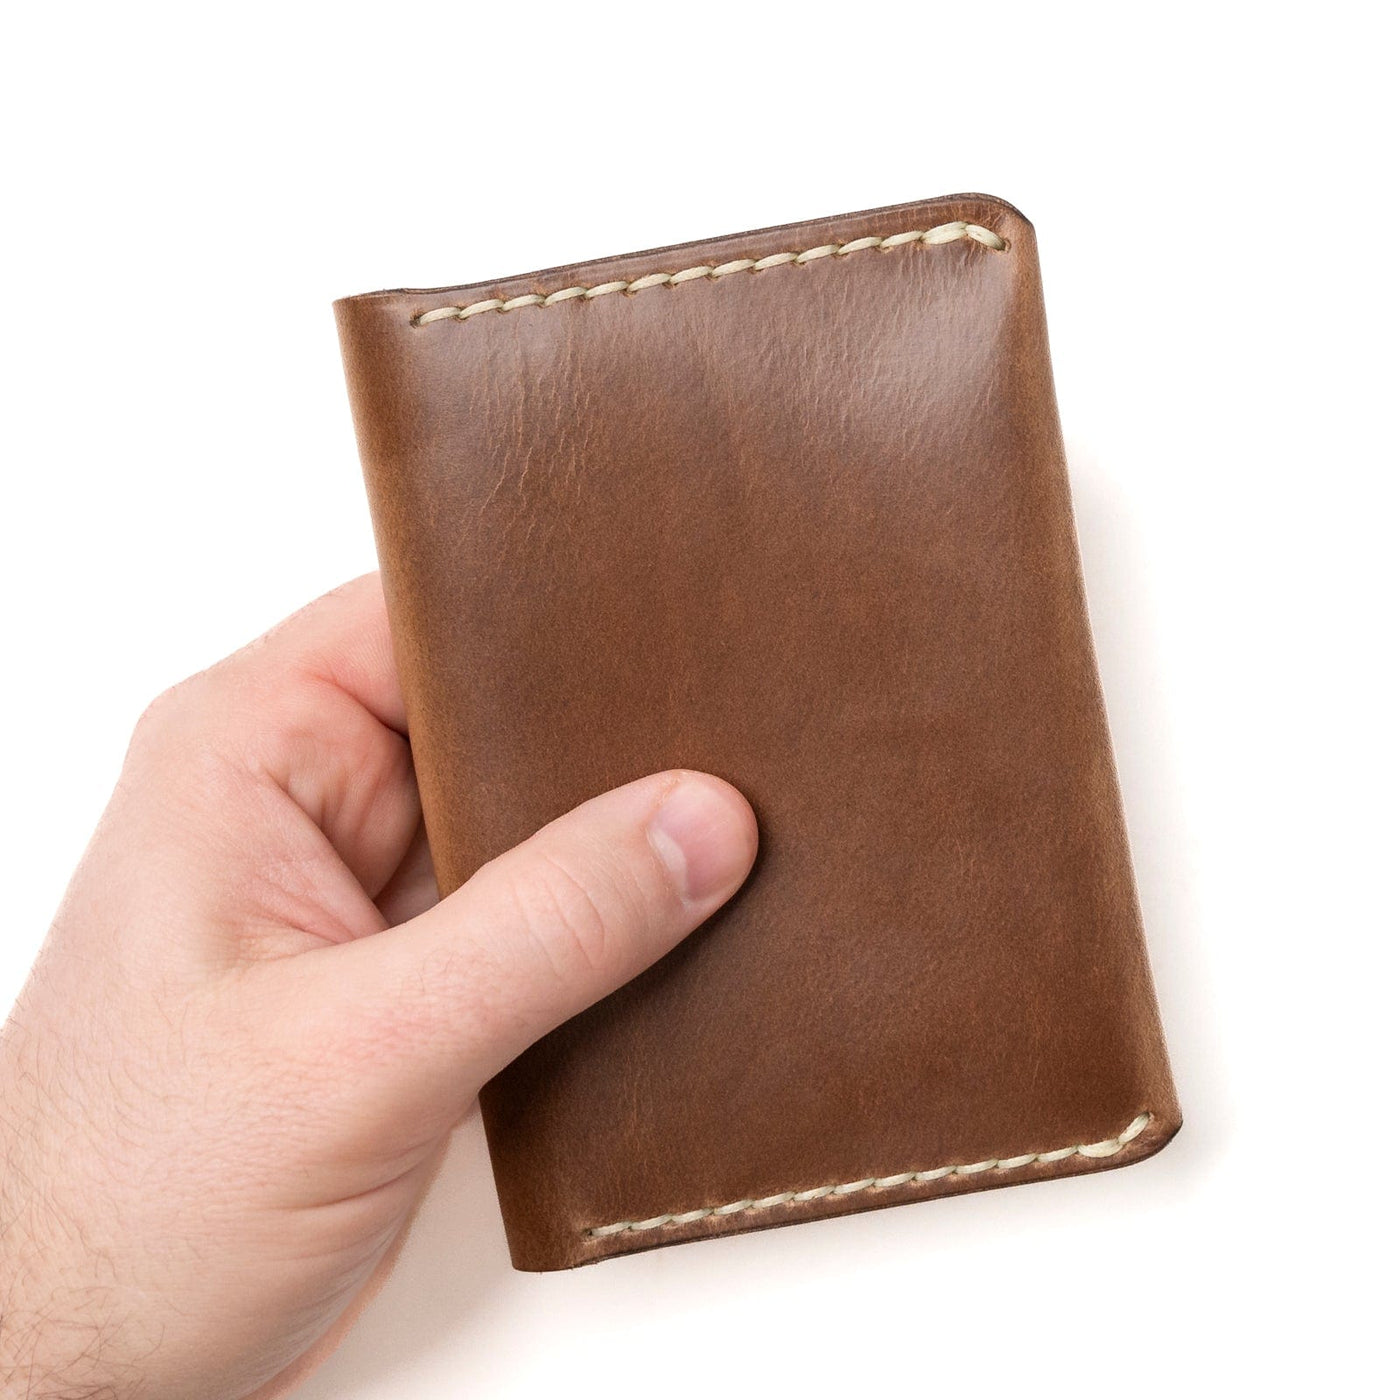 Leather Passport Cover - Natural Popov Leather